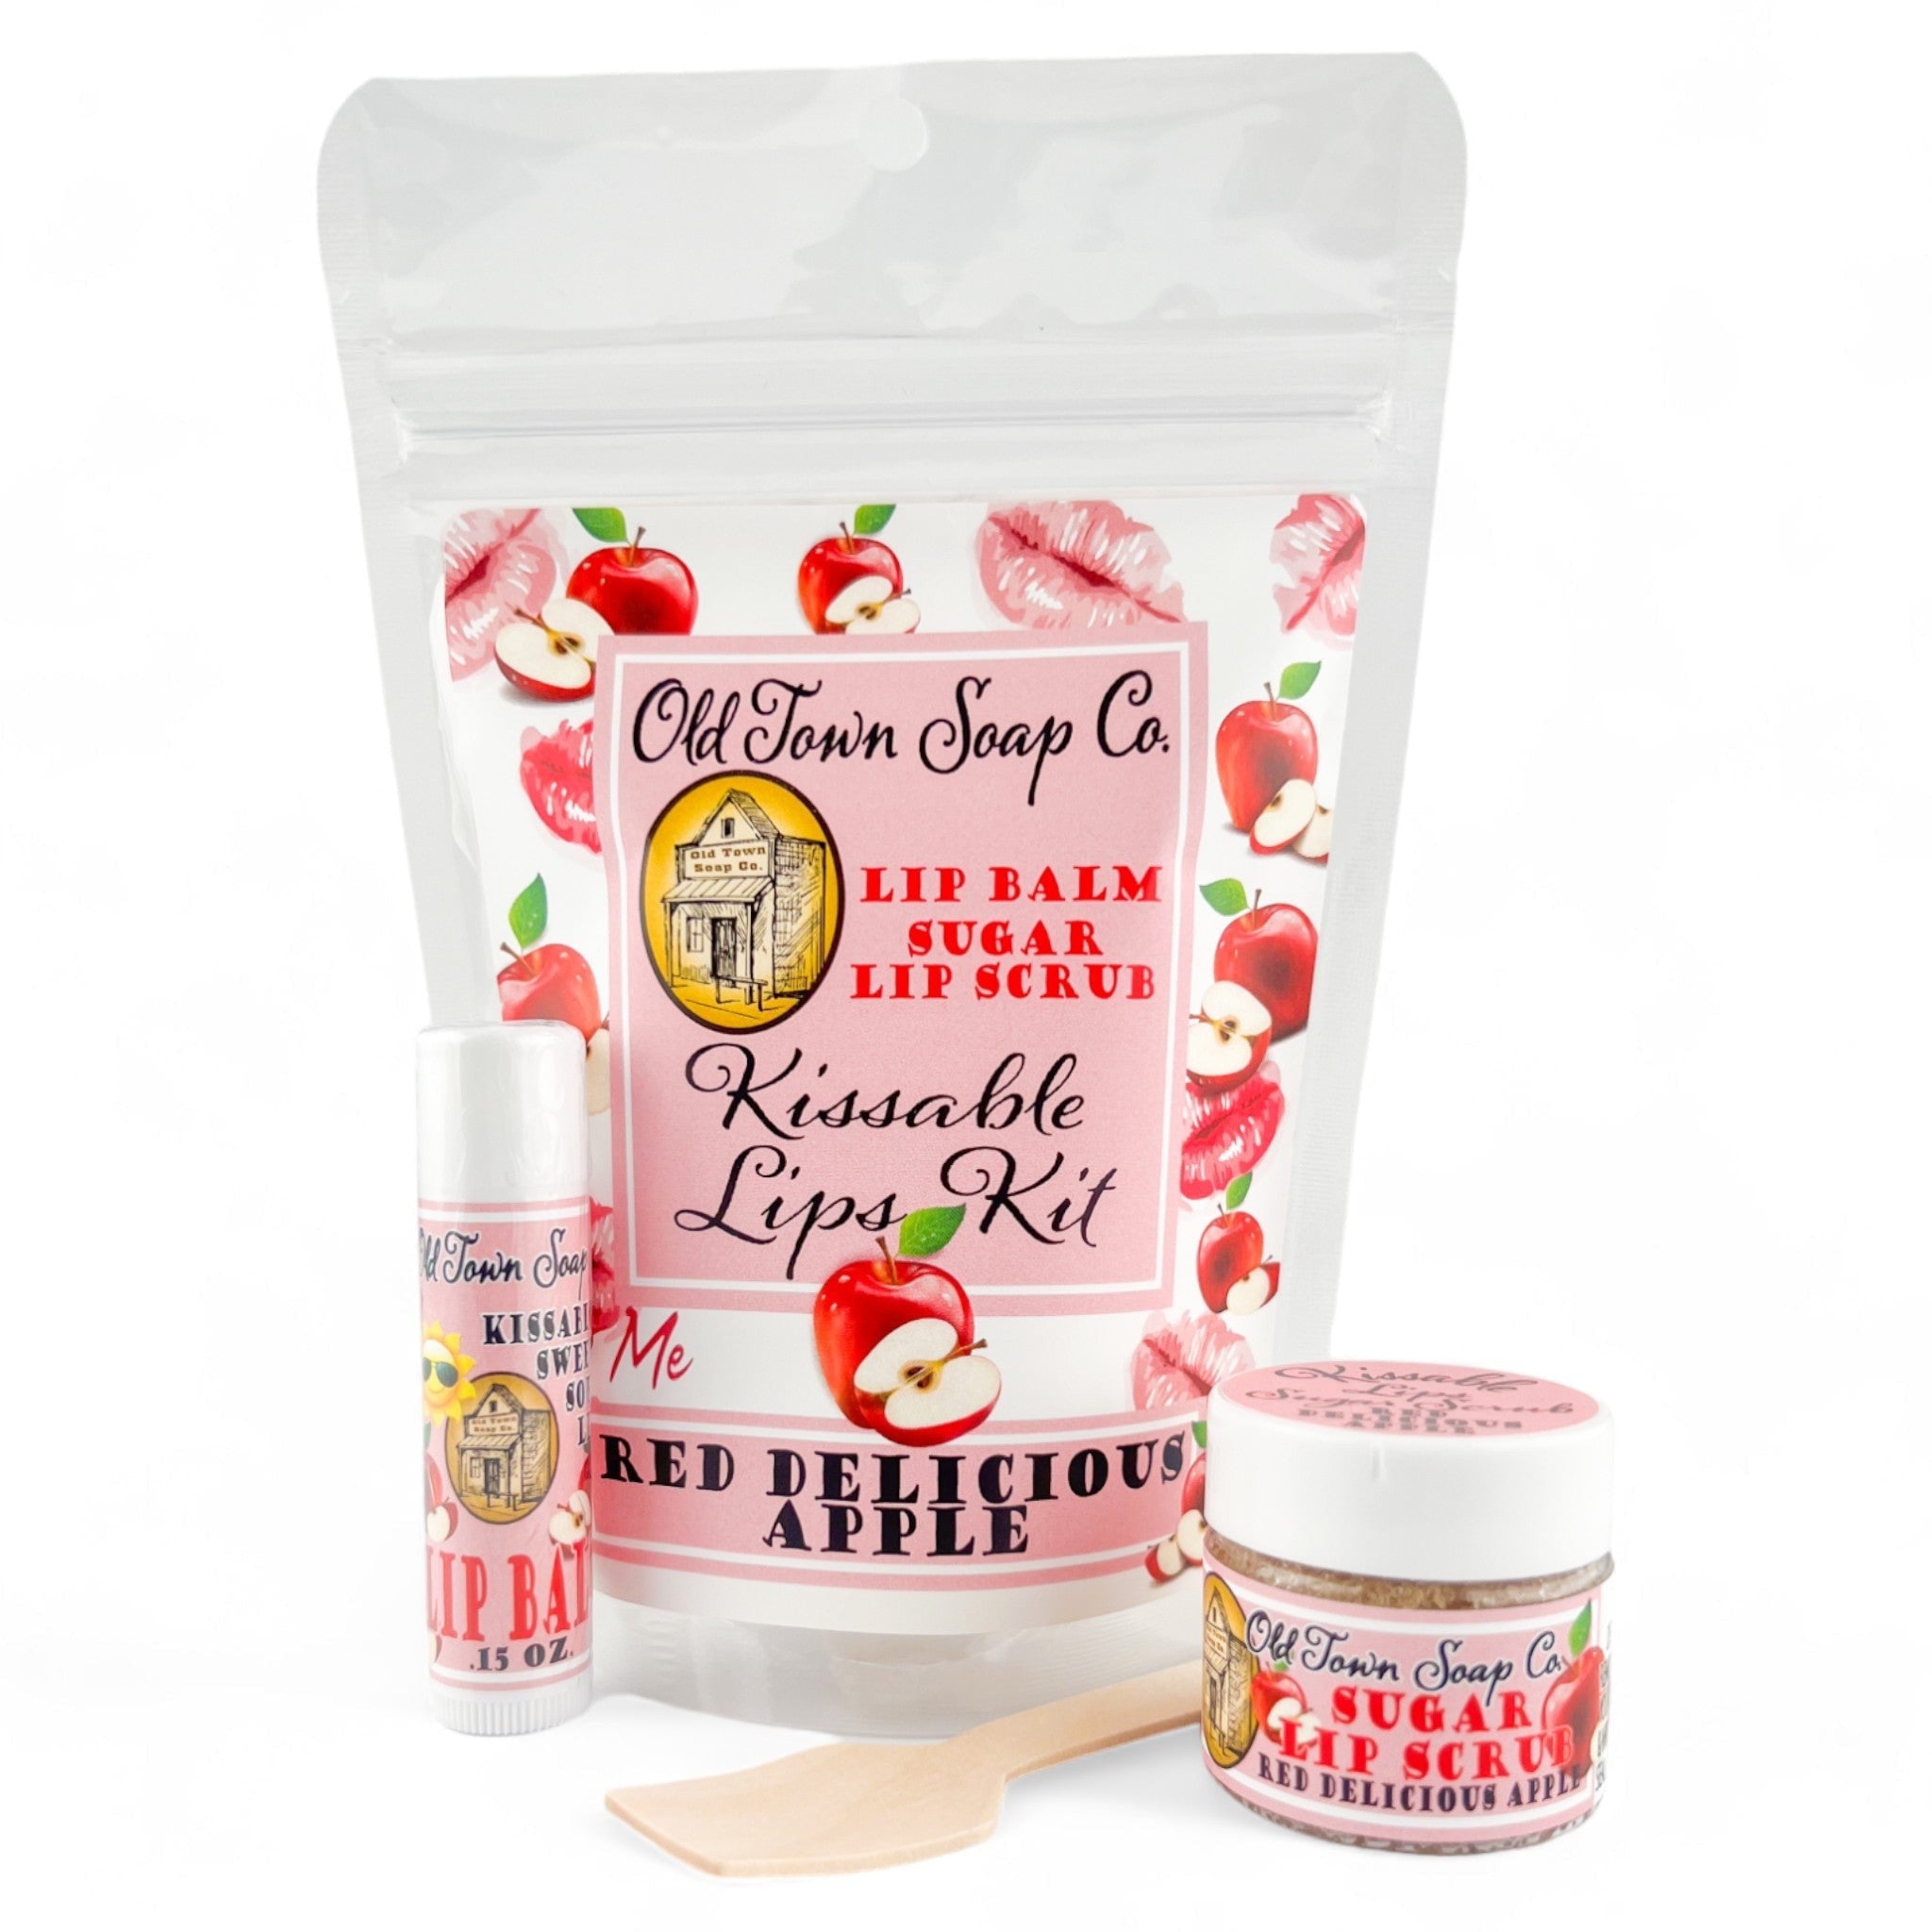 Red Delicious Apple -Kissable Lip Kits - Old Town Soap Co.